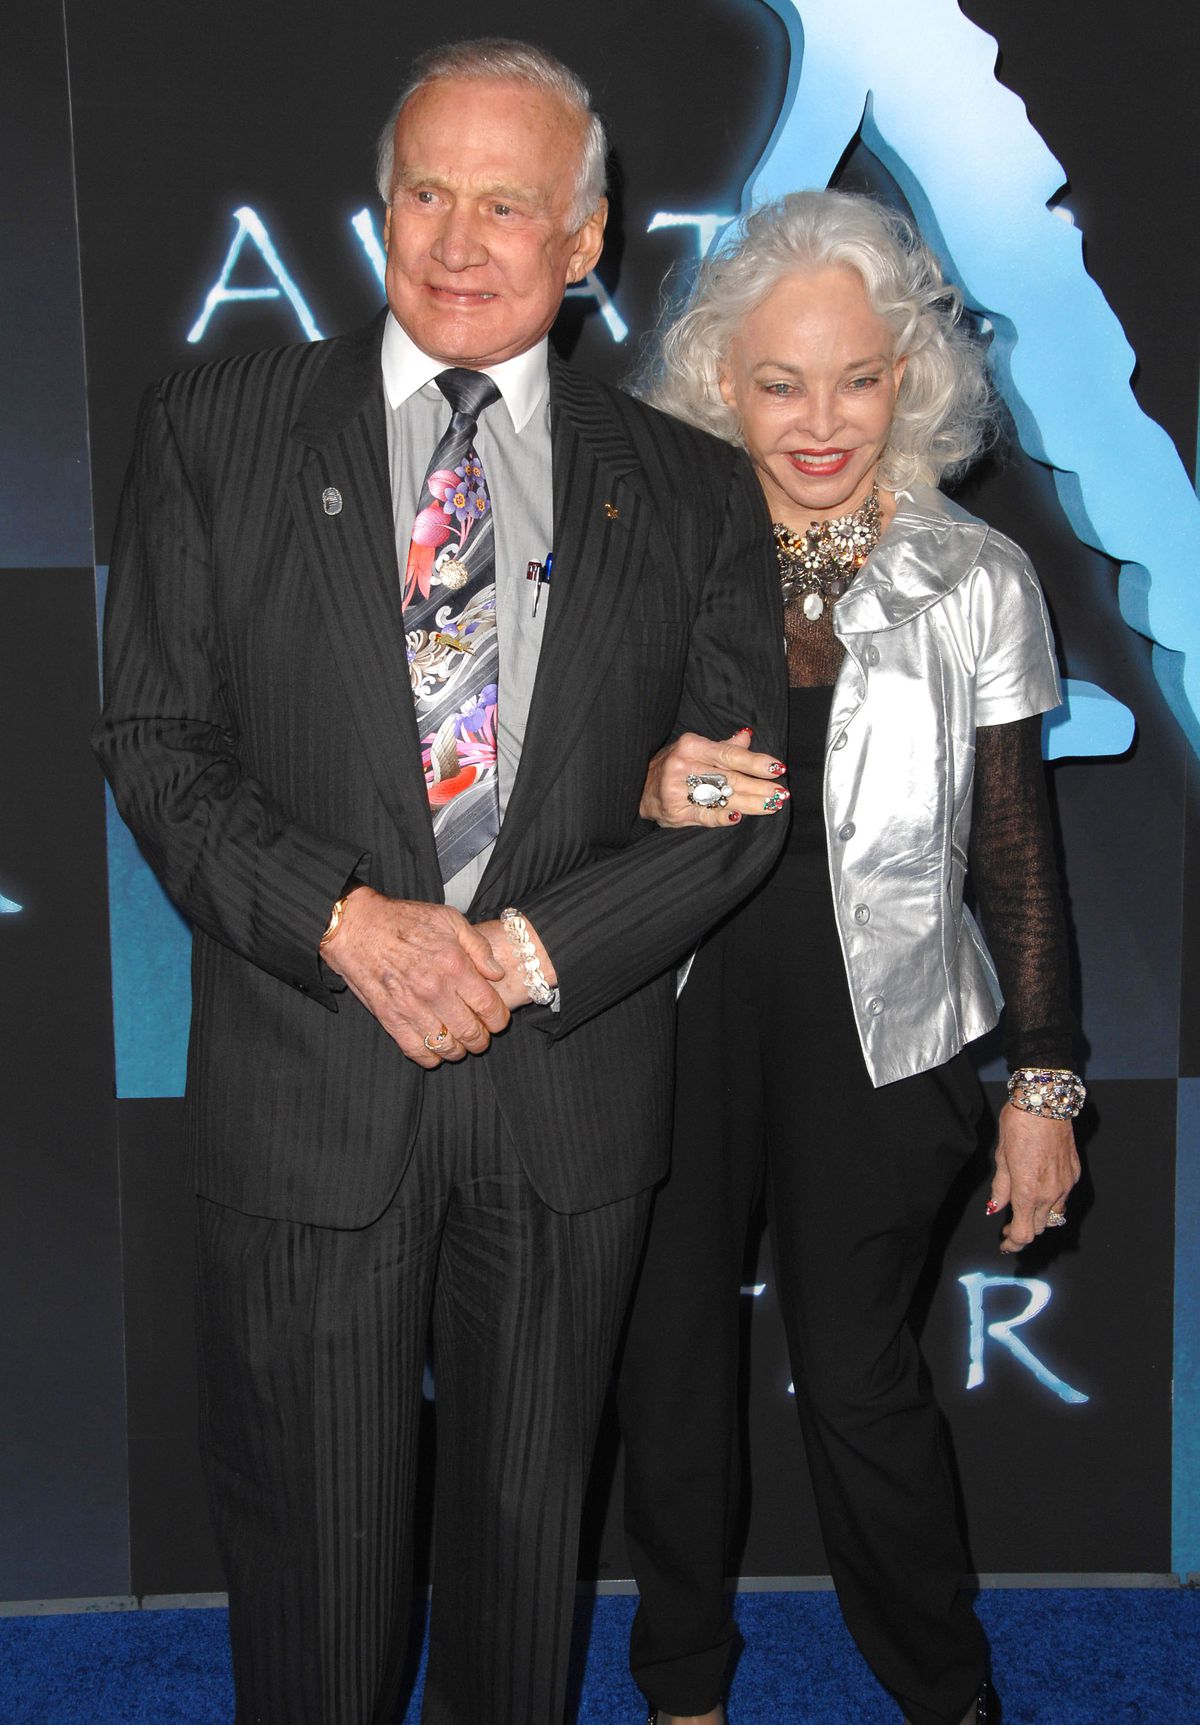 Astronaut Buzz Aldrin and then-wife Lois Driggs Cannon wearing nice old folks clothes to the Avatar premiere